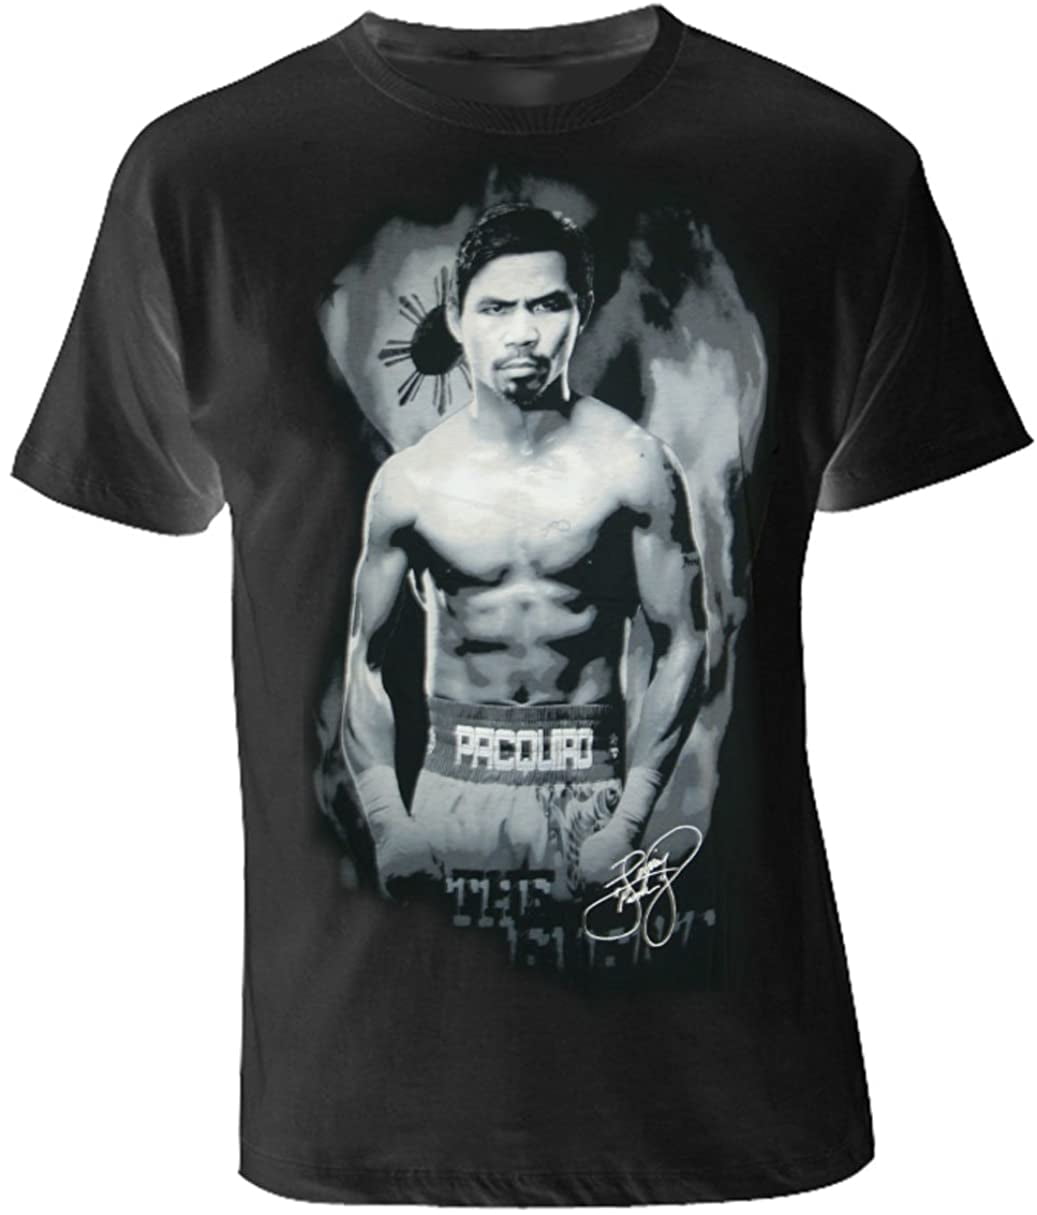 Manny Pacquiao Boxing Legend T Shirt New Black or White 